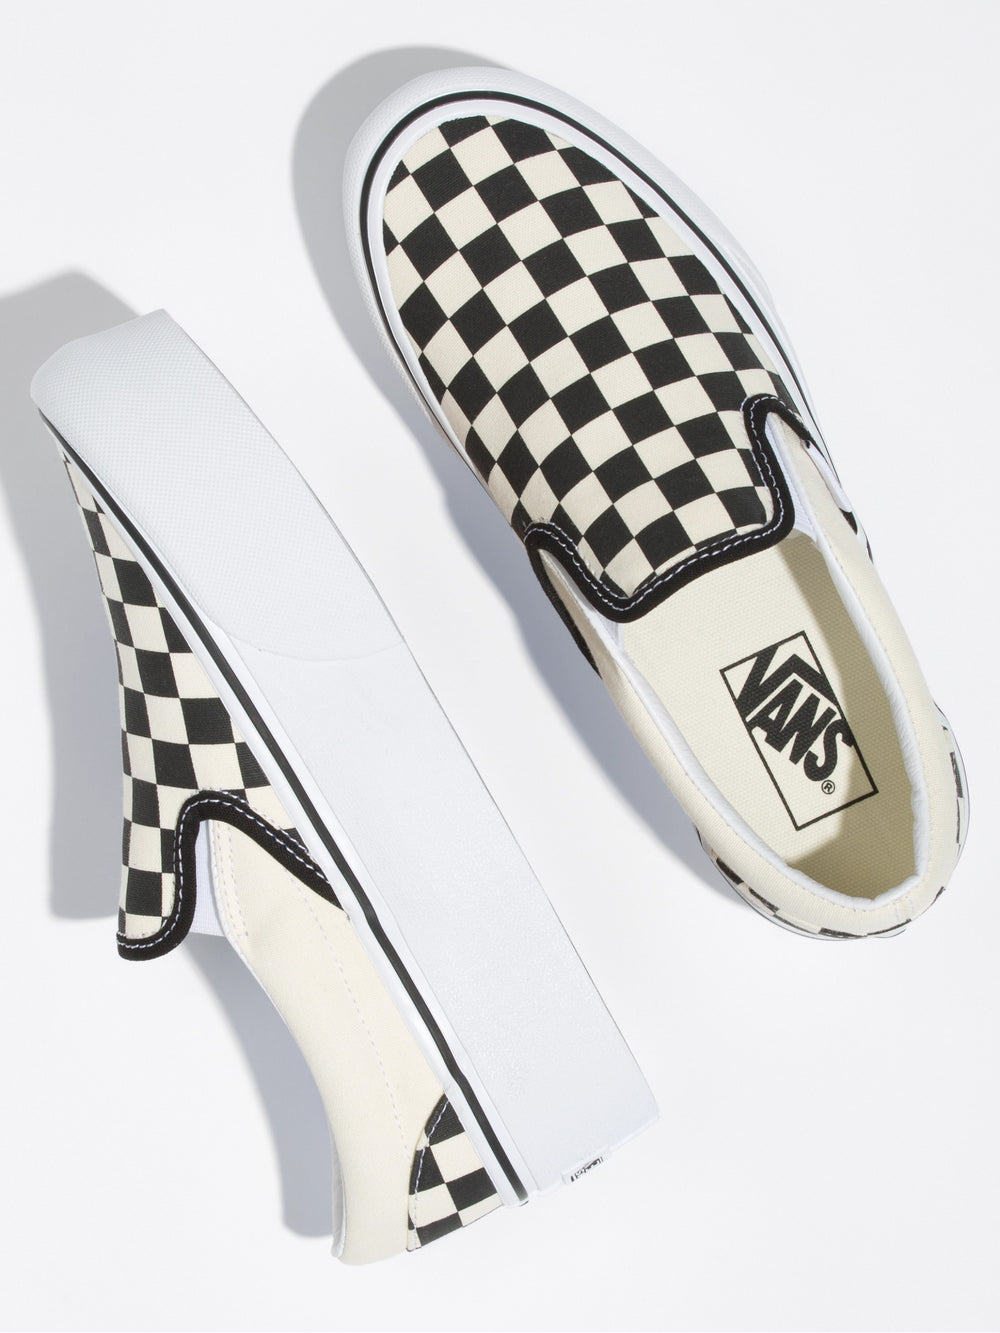 How to Style Slip-On Vans